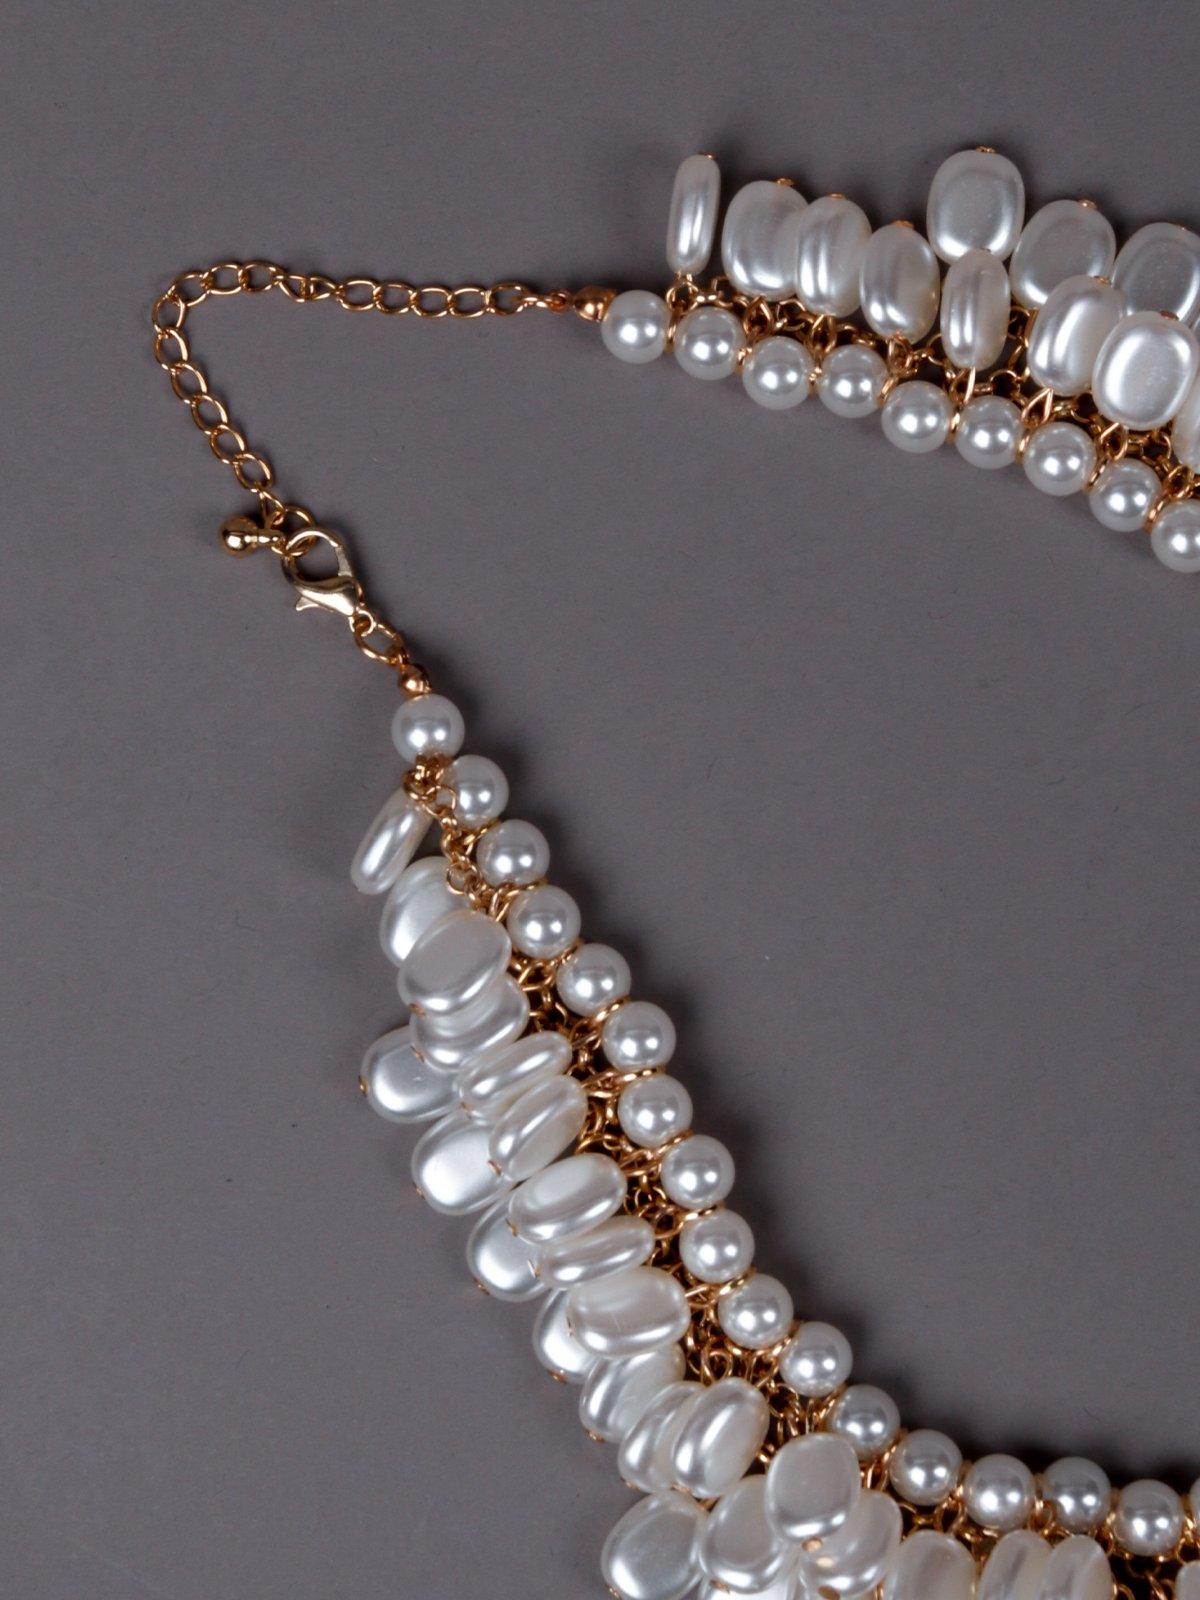 Women's Overflowing Glossy White Beaded Necklace. - Odette